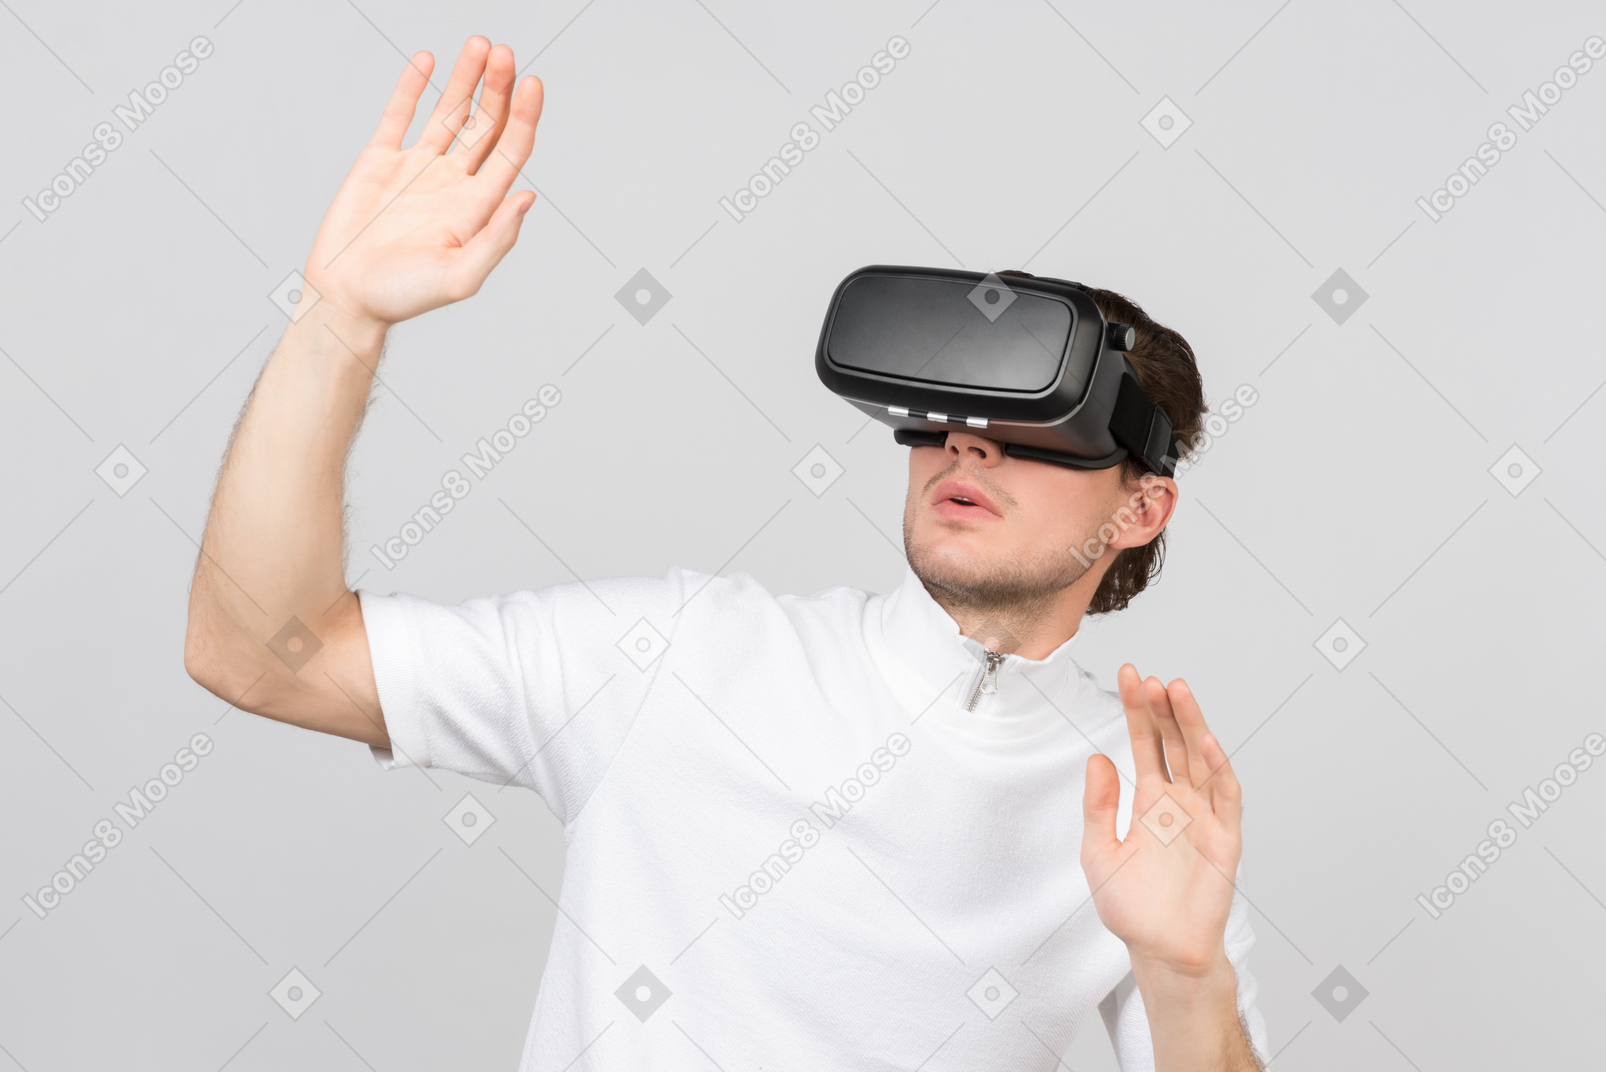 Man in virtual reality headset standing with his hands raised in surrender